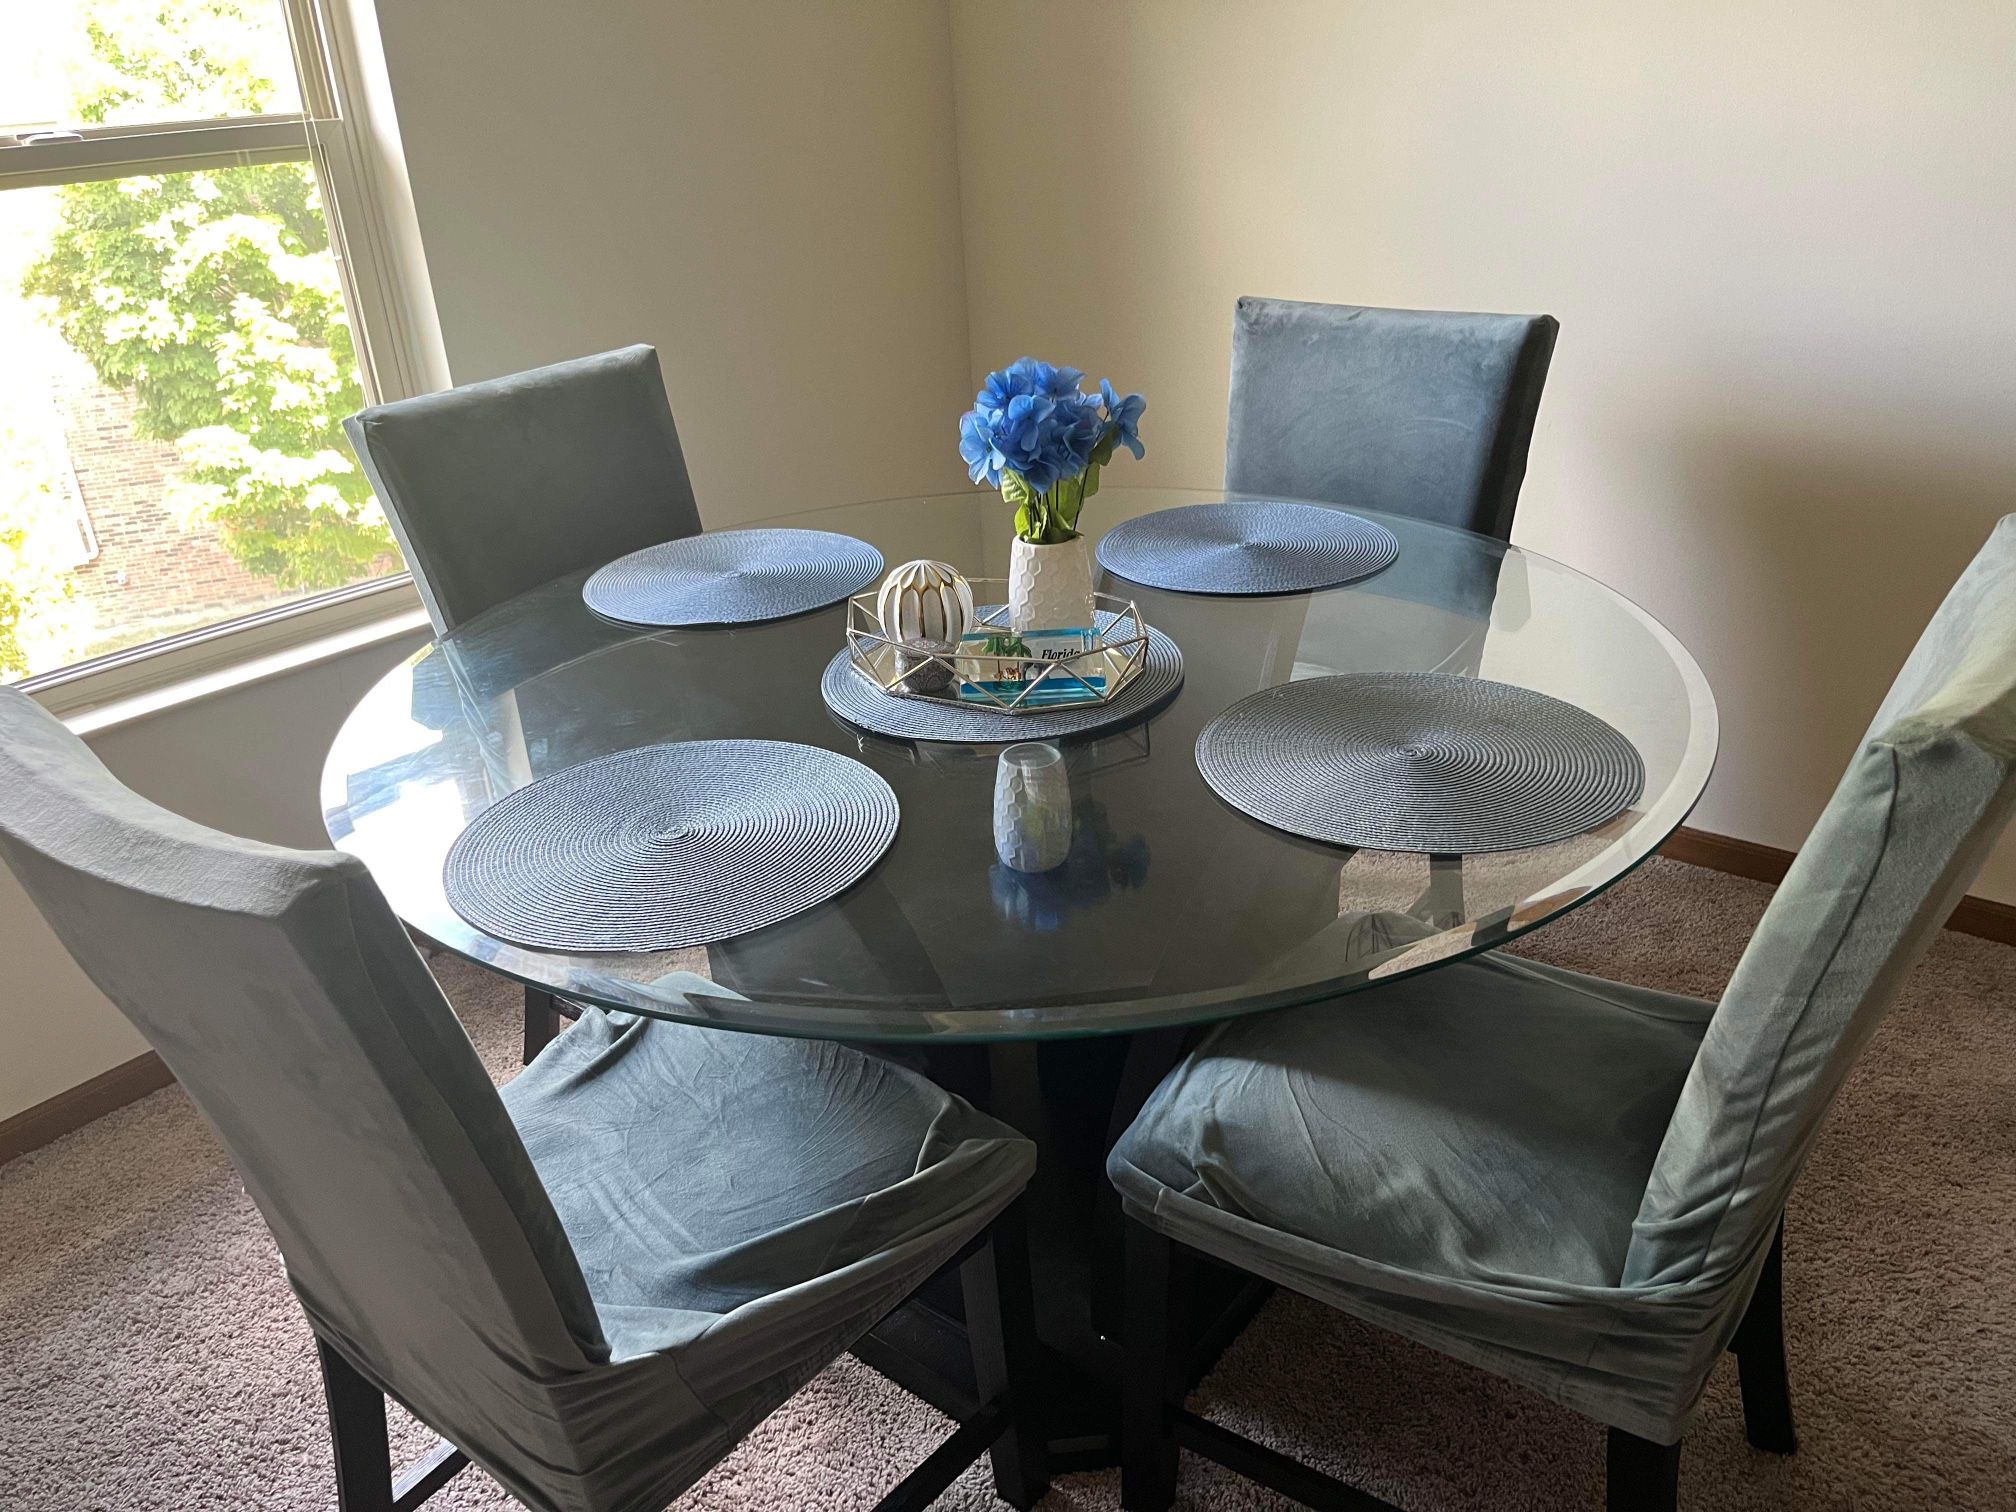 Dining Table- Almost New!